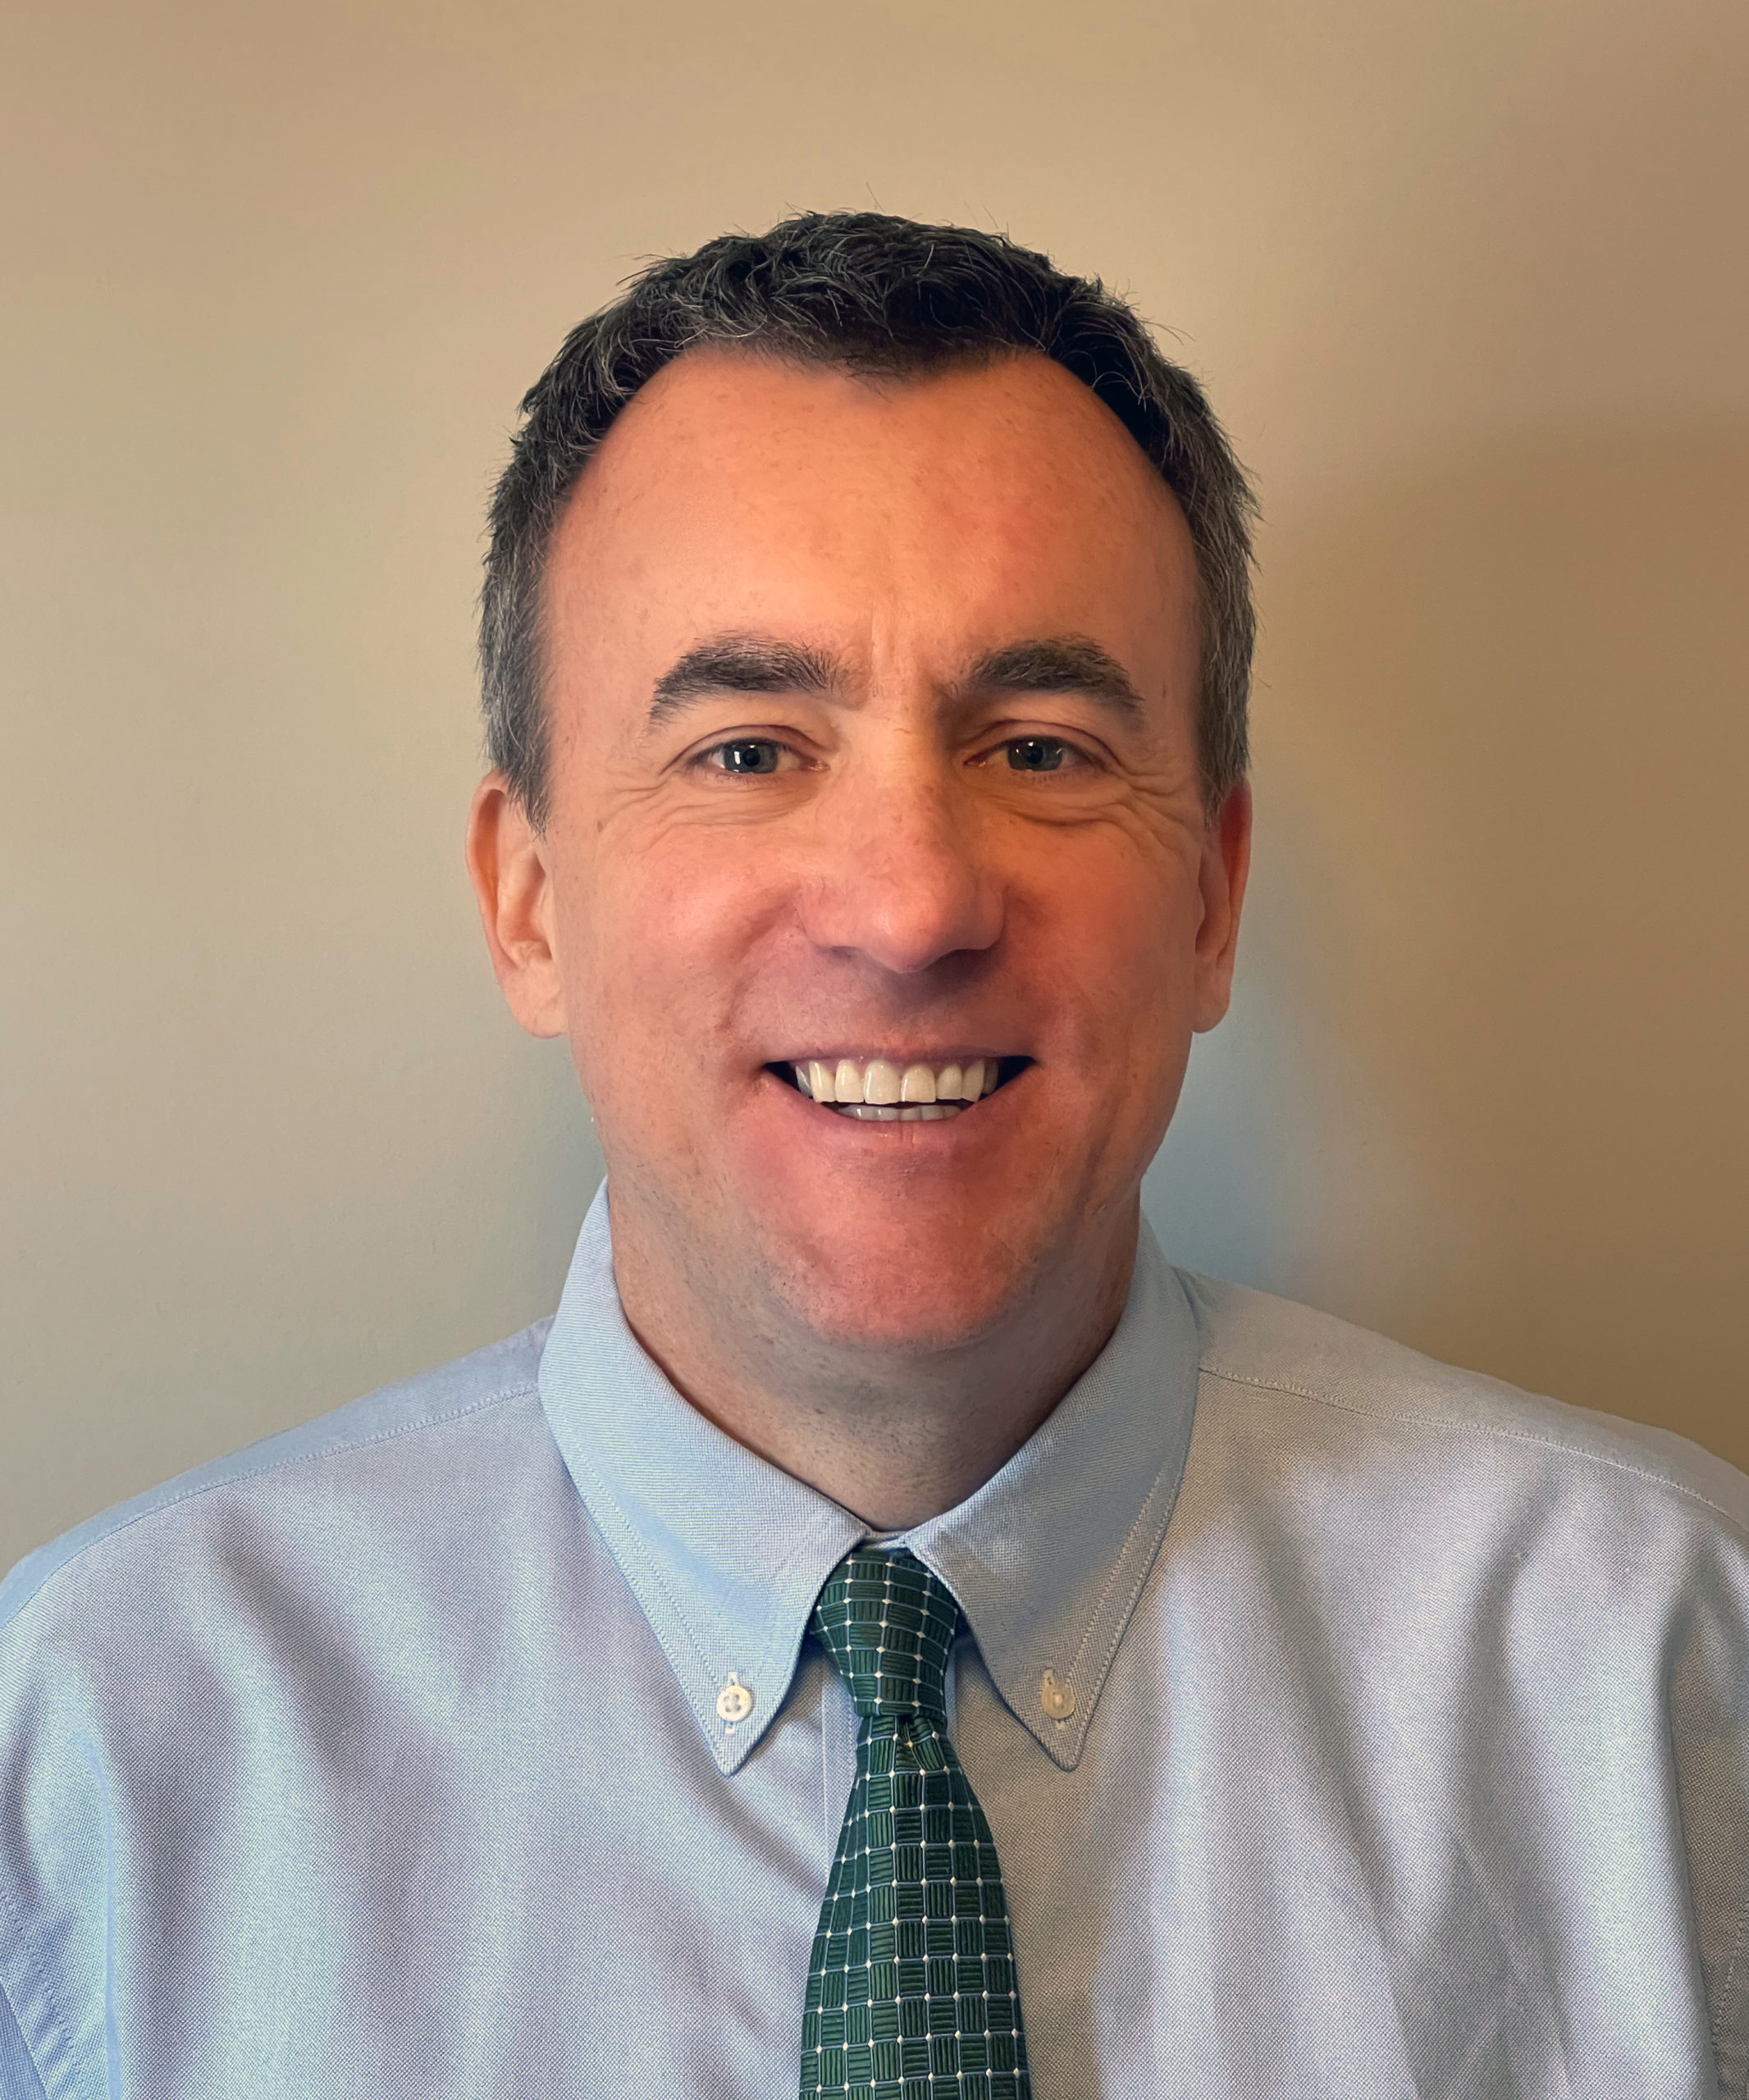 Kevin Brenan Joins RHA Health Services as Chief Financial Officer